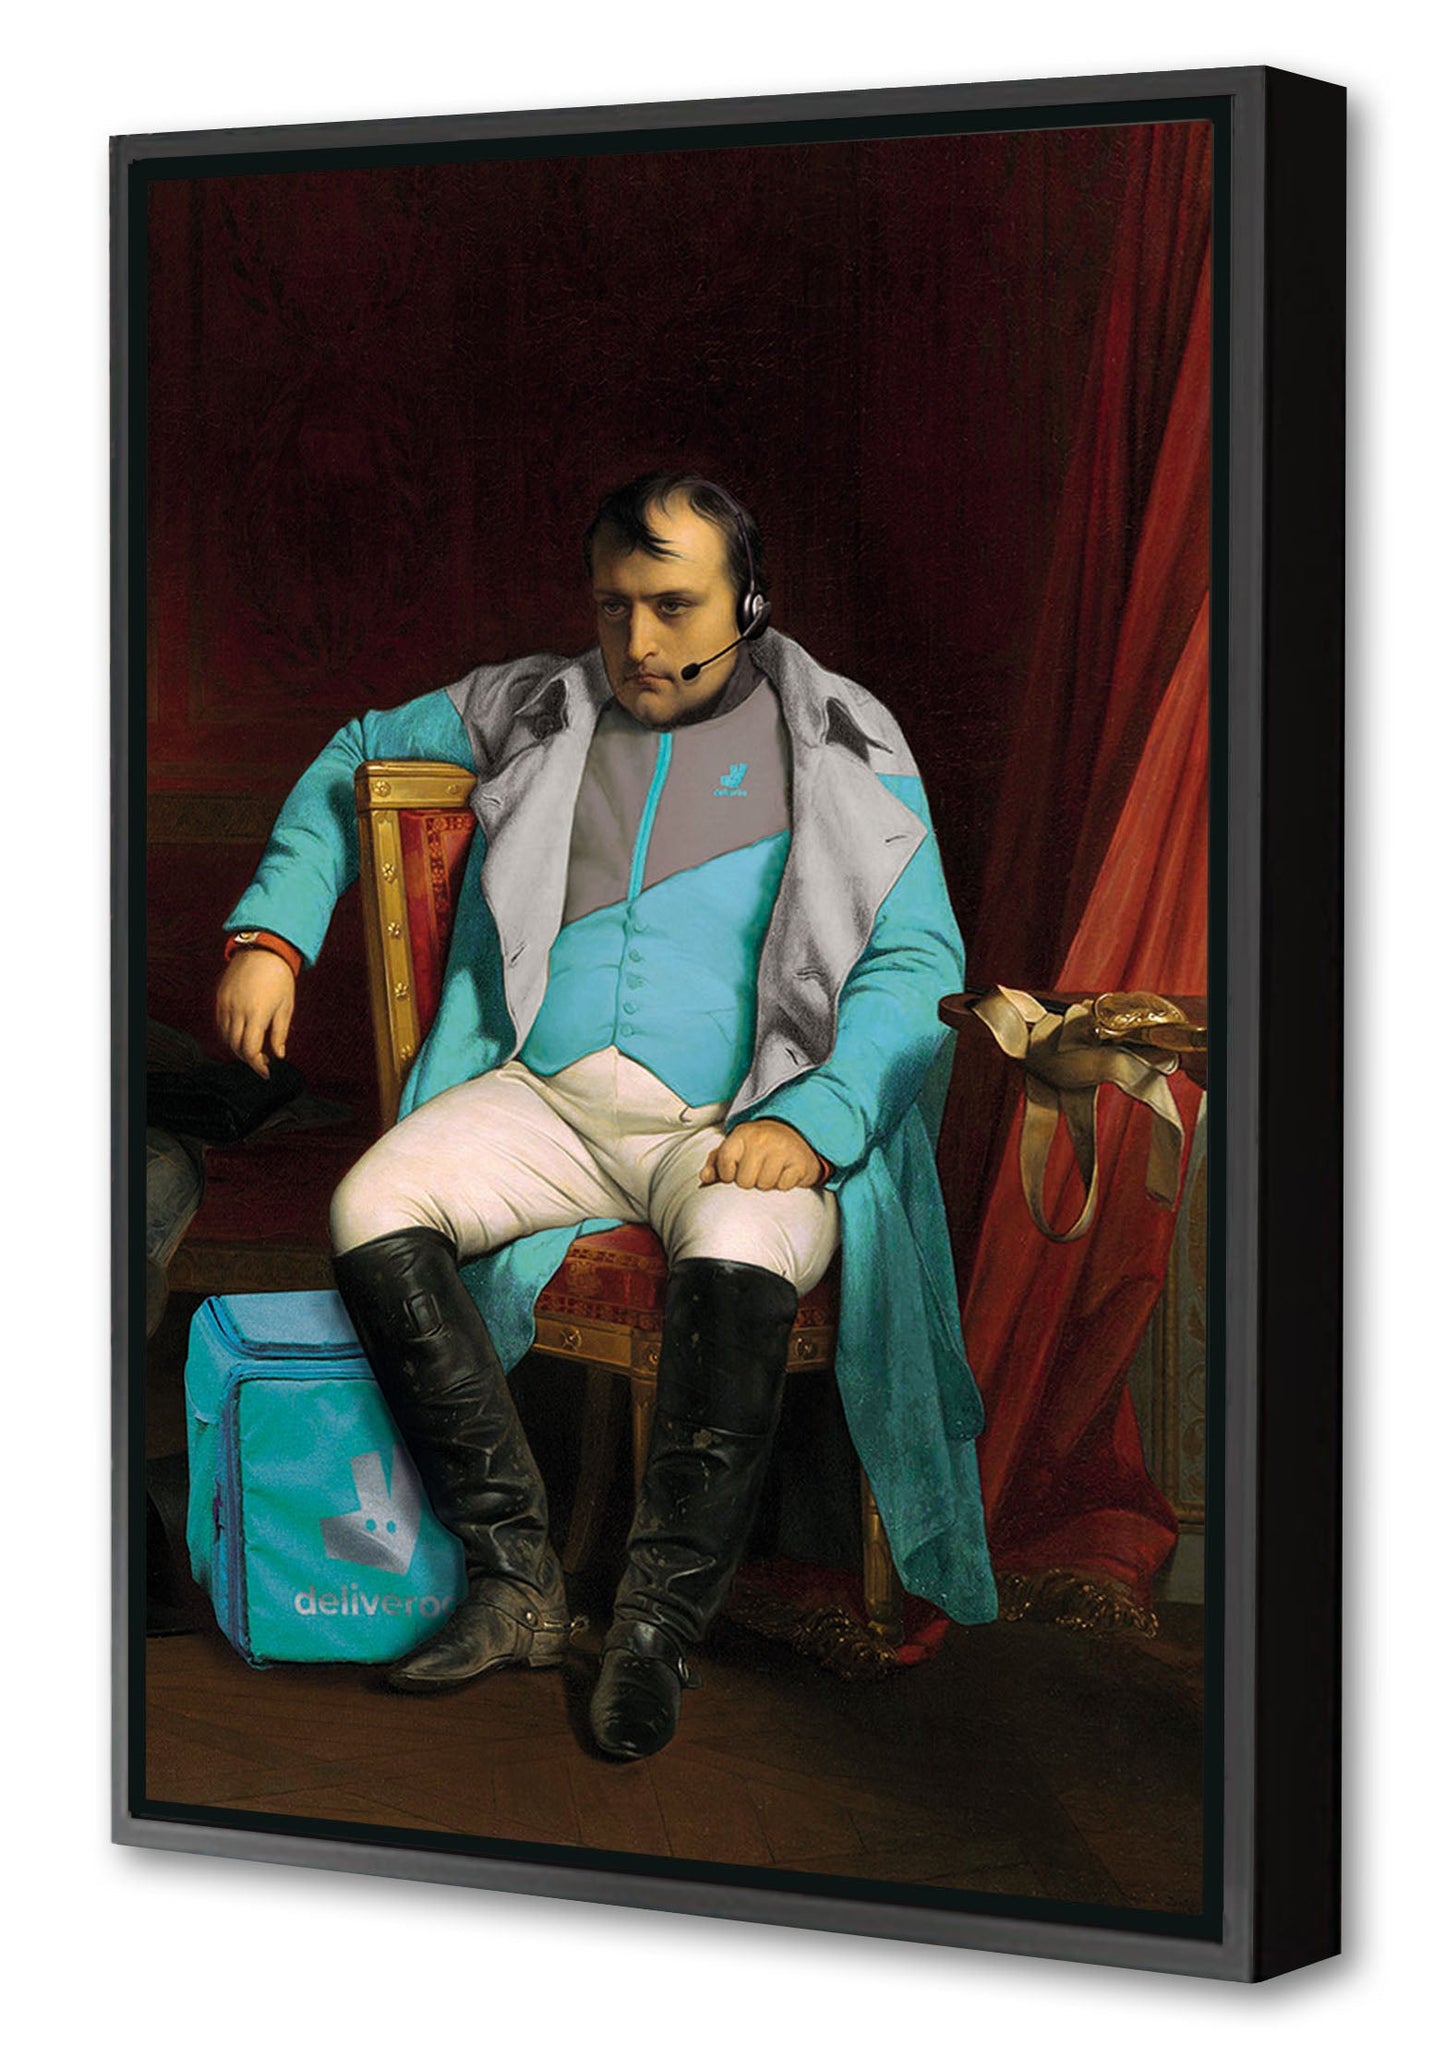 Napoleon Deliveroo-historical, print-Canvas Print with Box Frame-40 x 60 cm-BLUE SHAKER